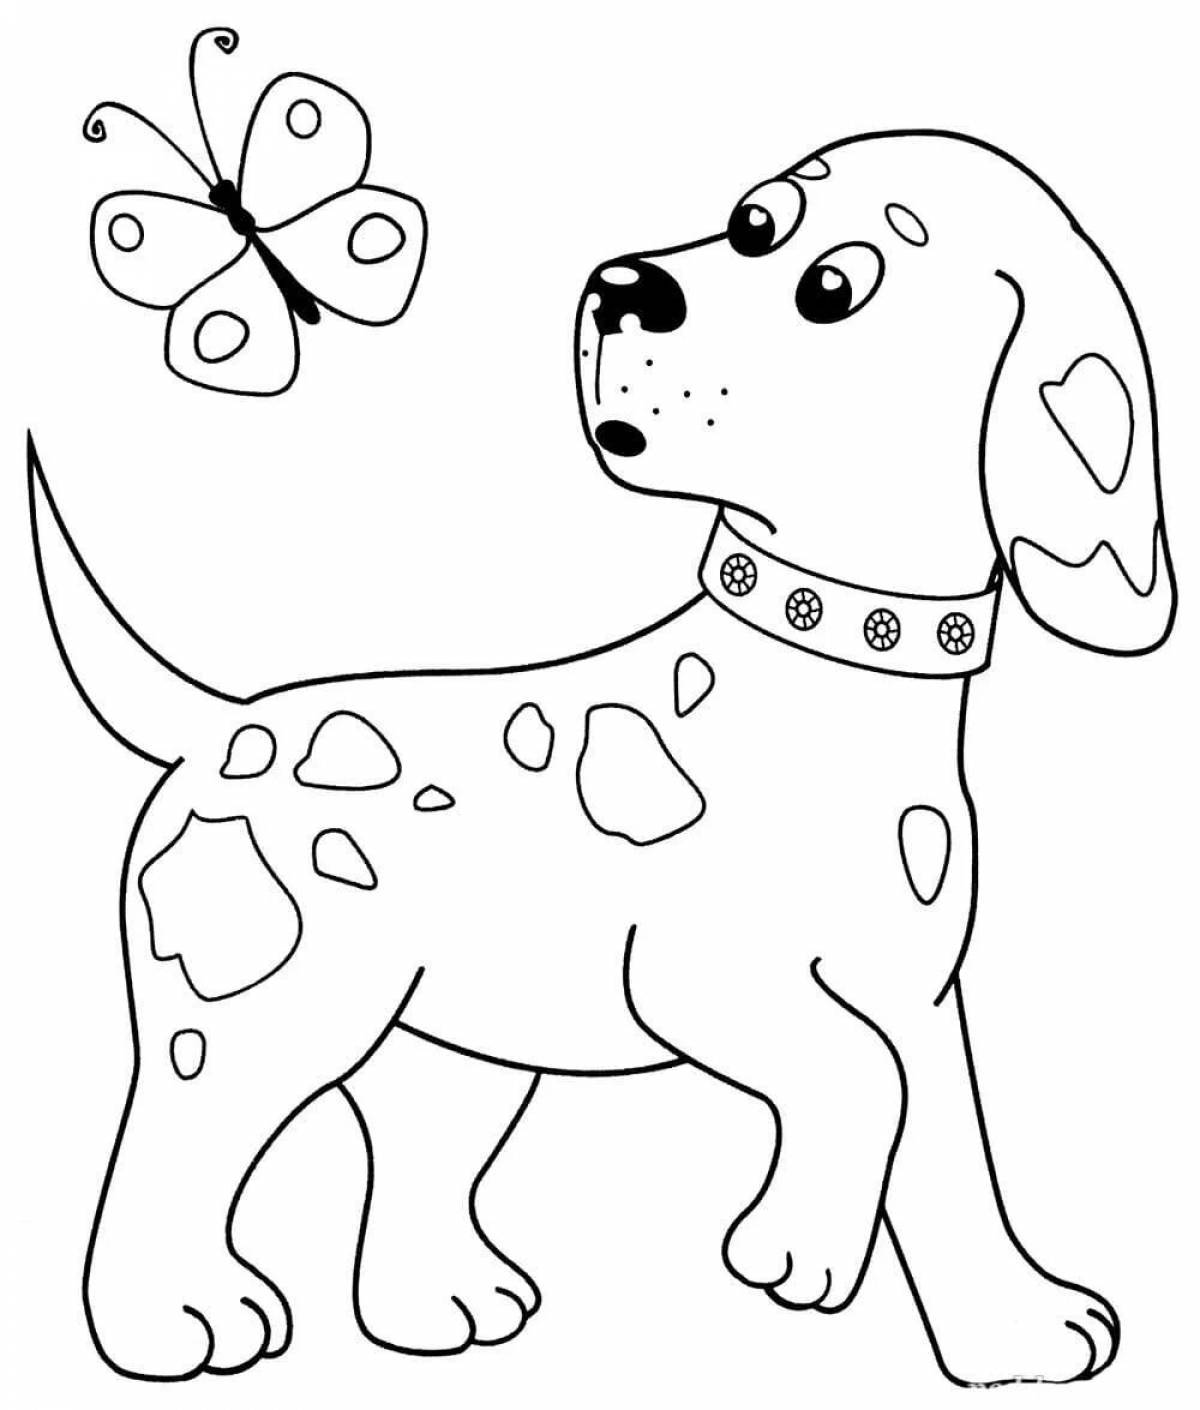 Adorable dog coloring book for kids 4-5 years old